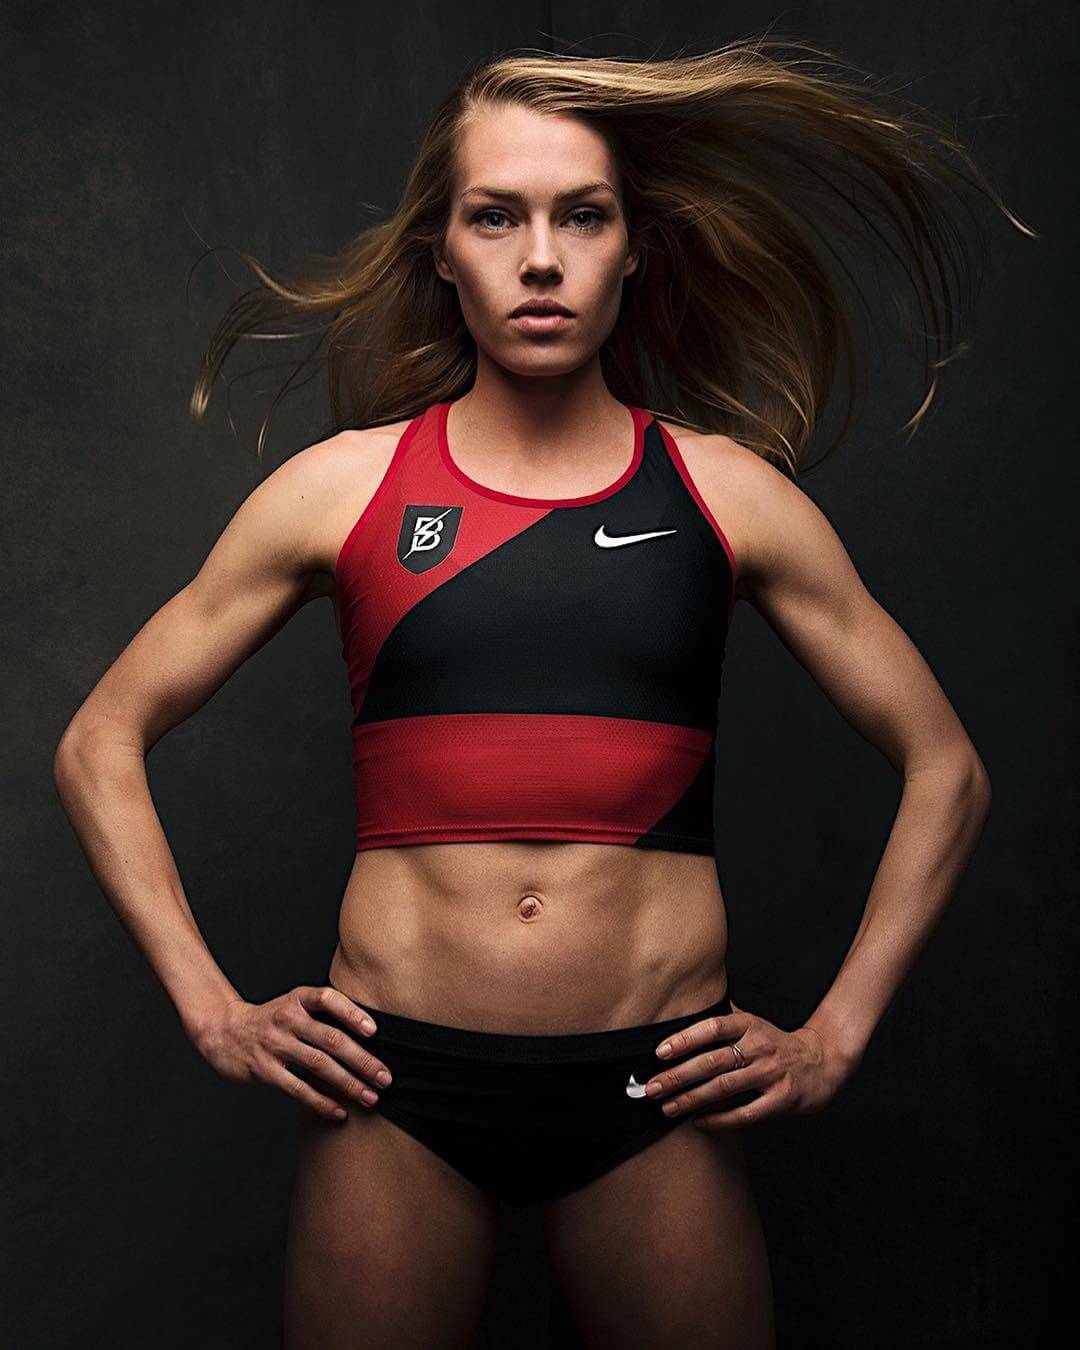 49 Hot Pictures Of Colleen Quigley Will Make You Fall In Love Instantly | Best Of Comic Books